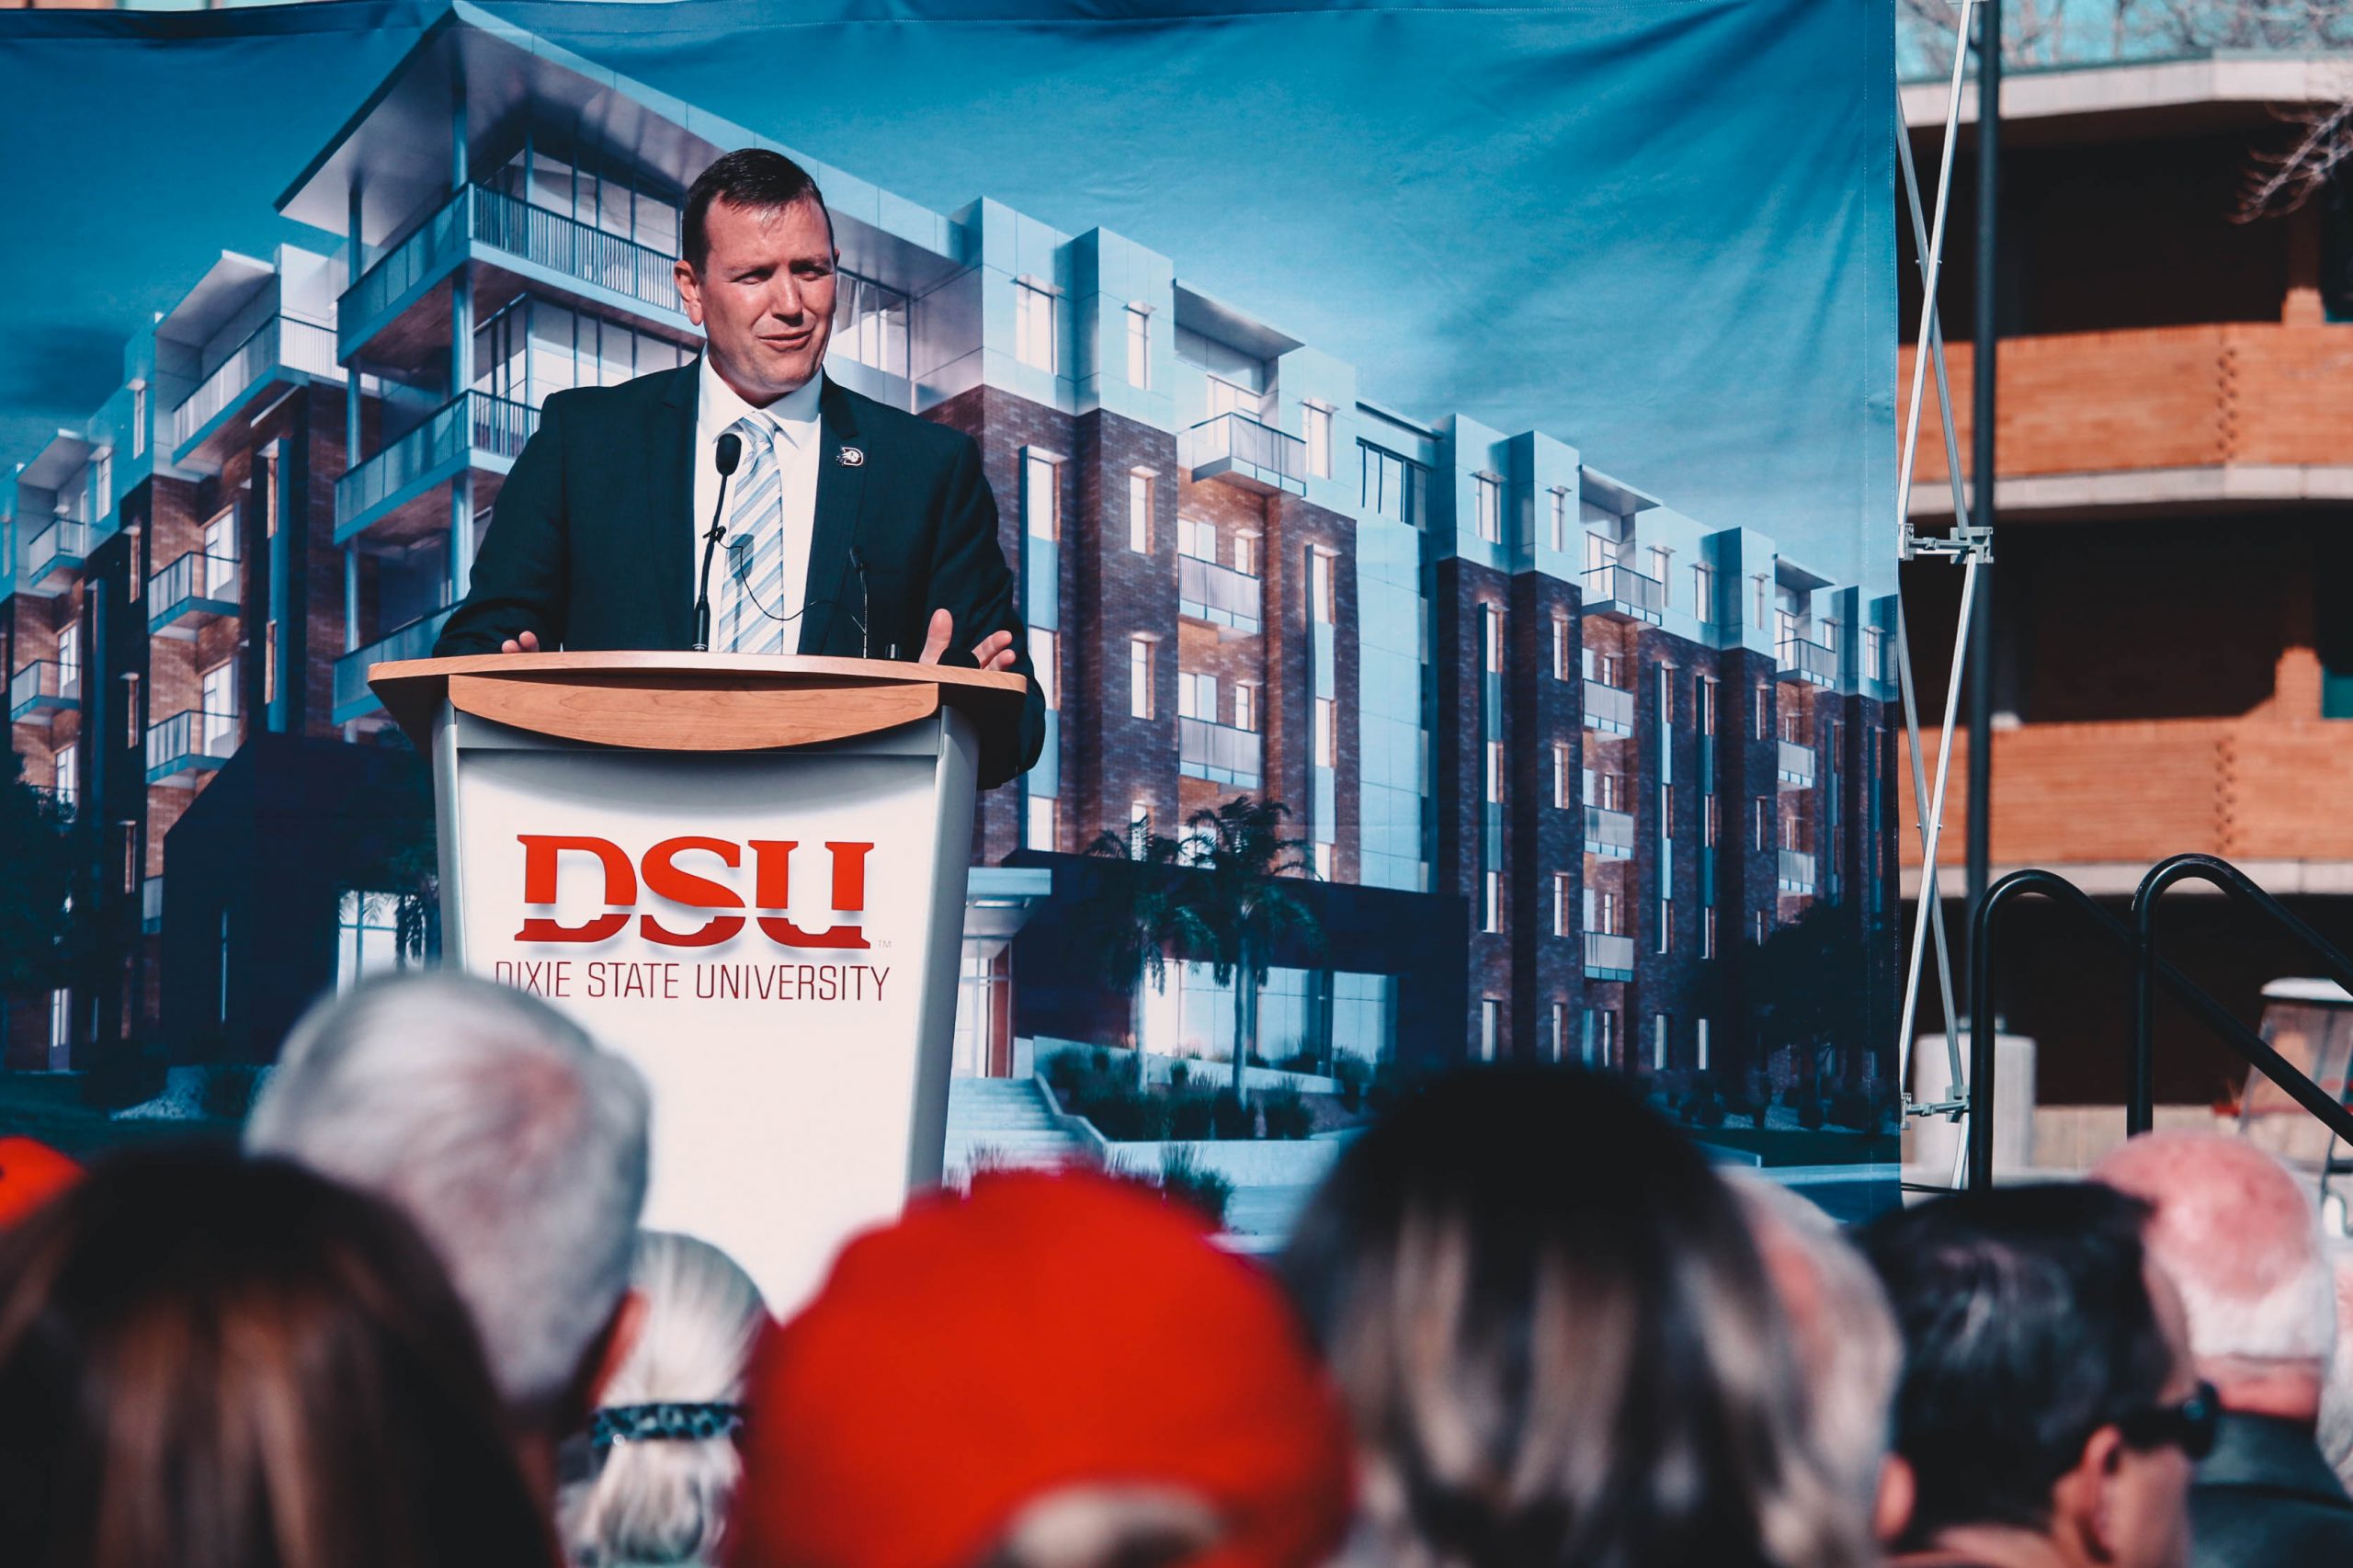 Campus View Suites II groundbreaking, more to come in 2020